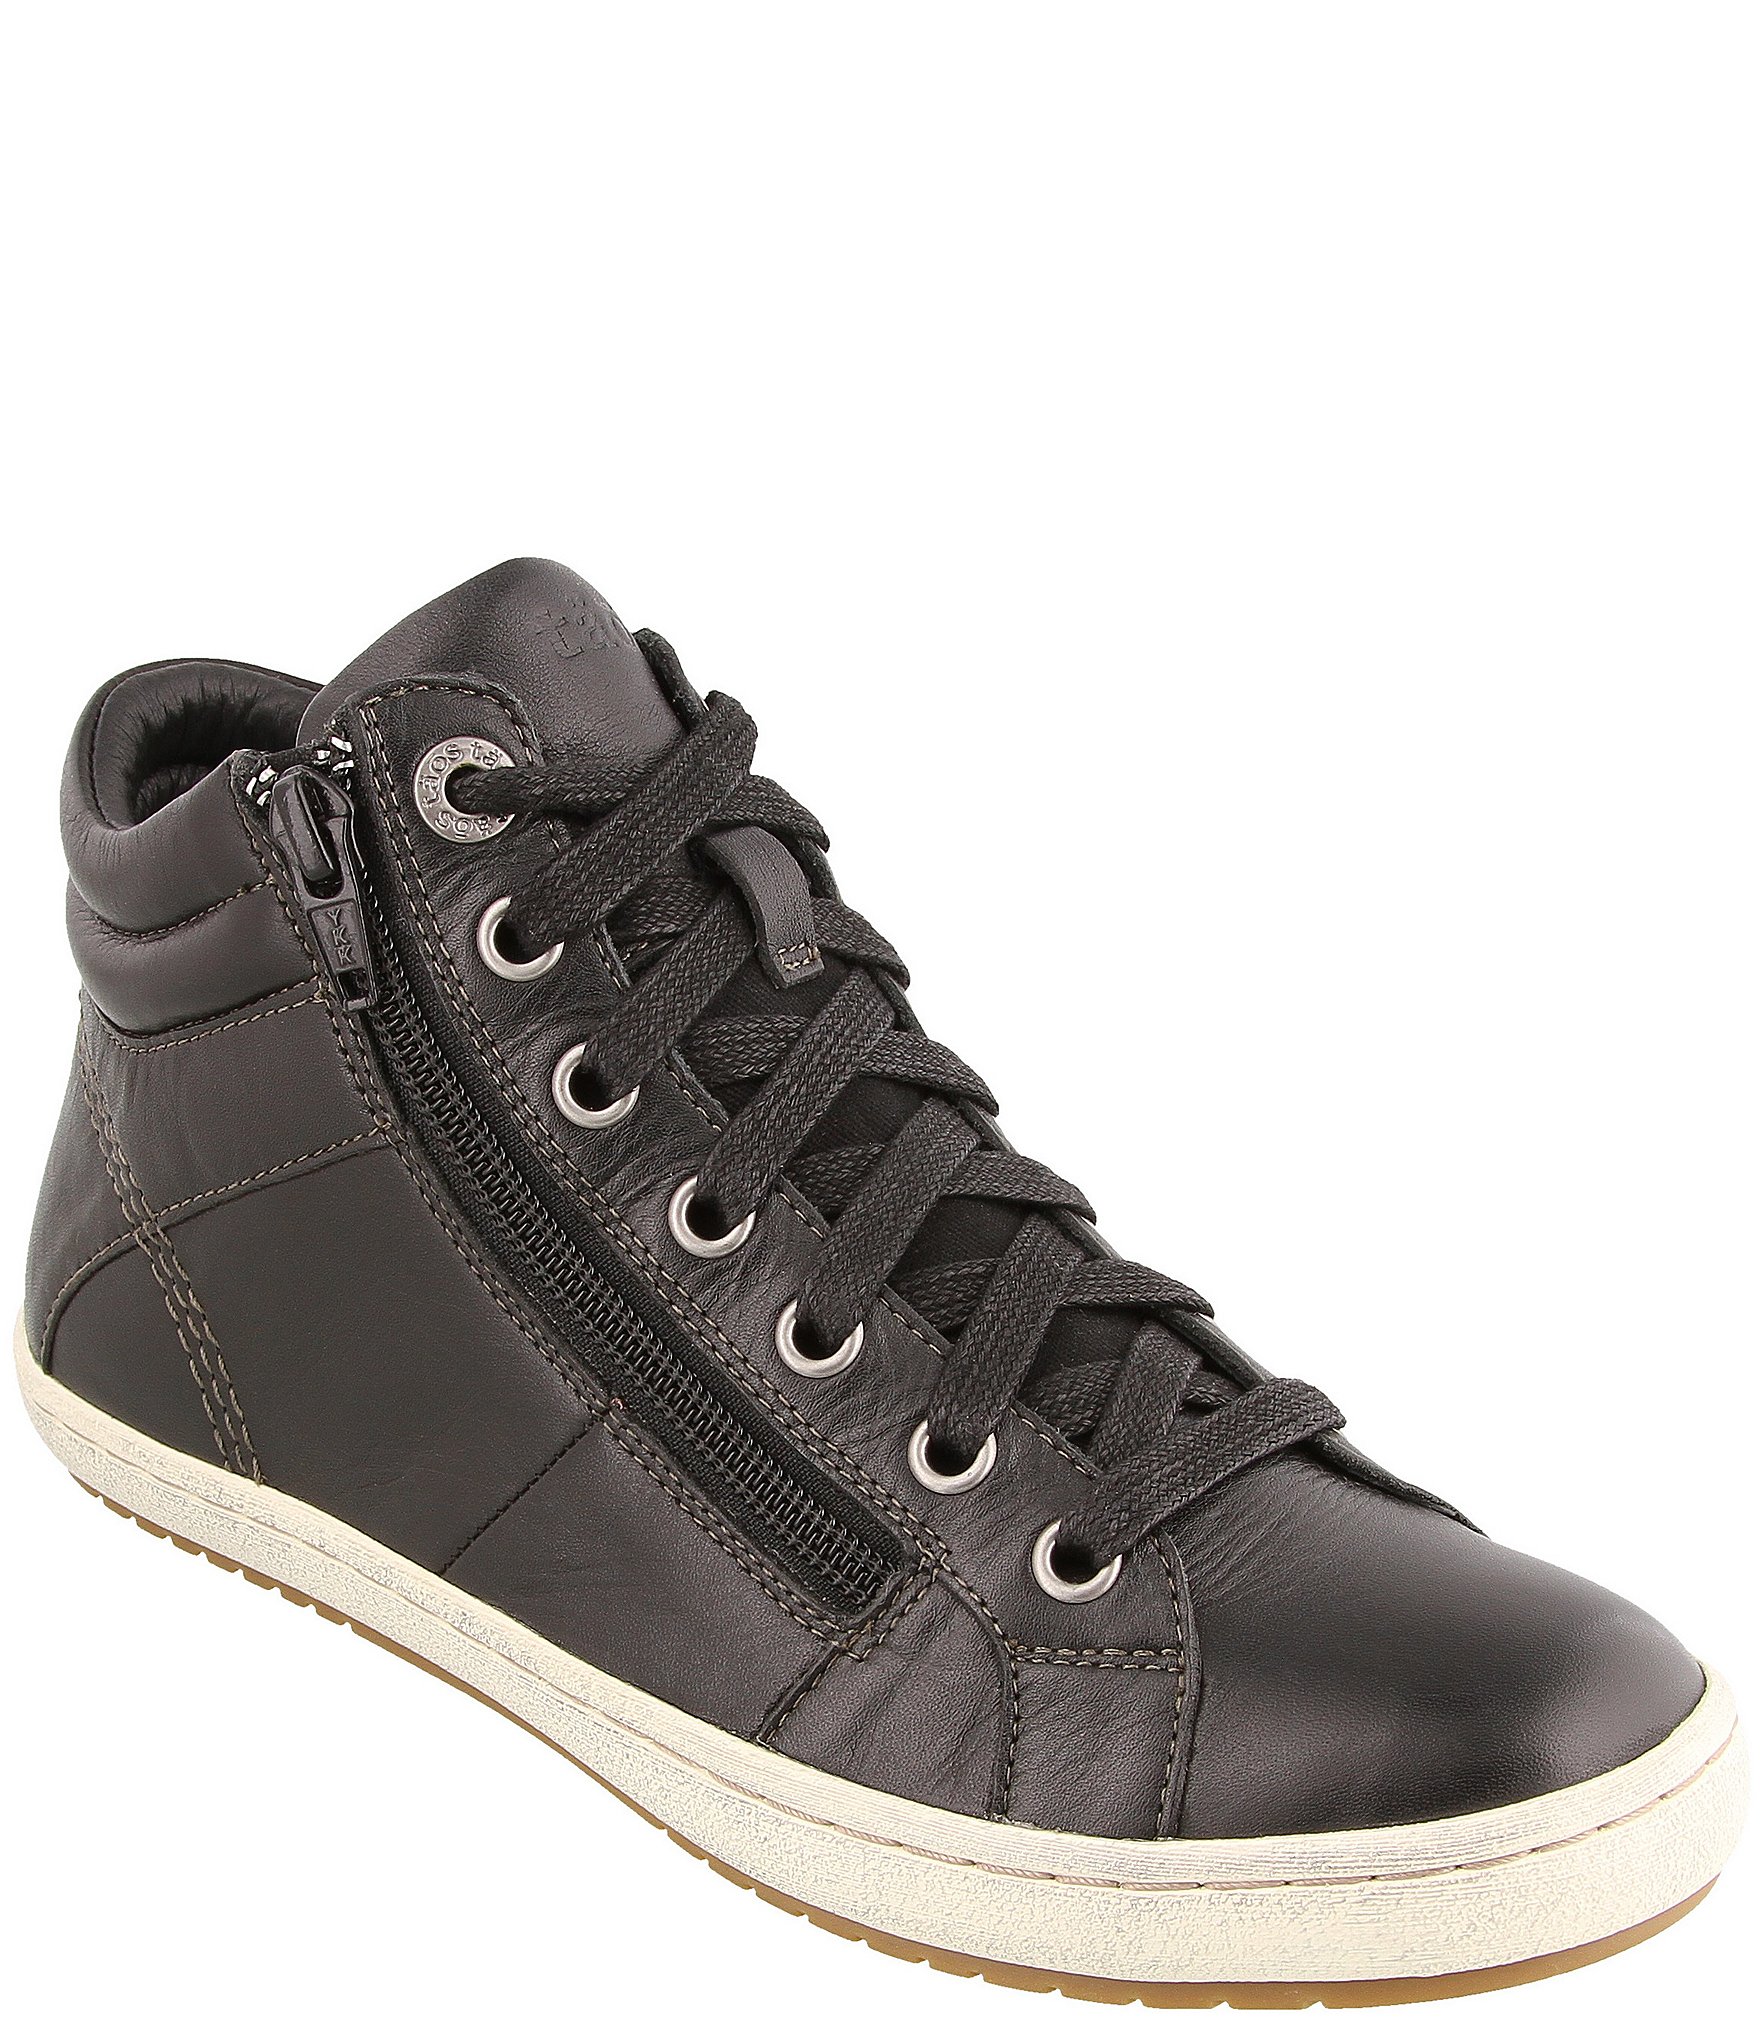 Taos Footwear Union Leather High Top 